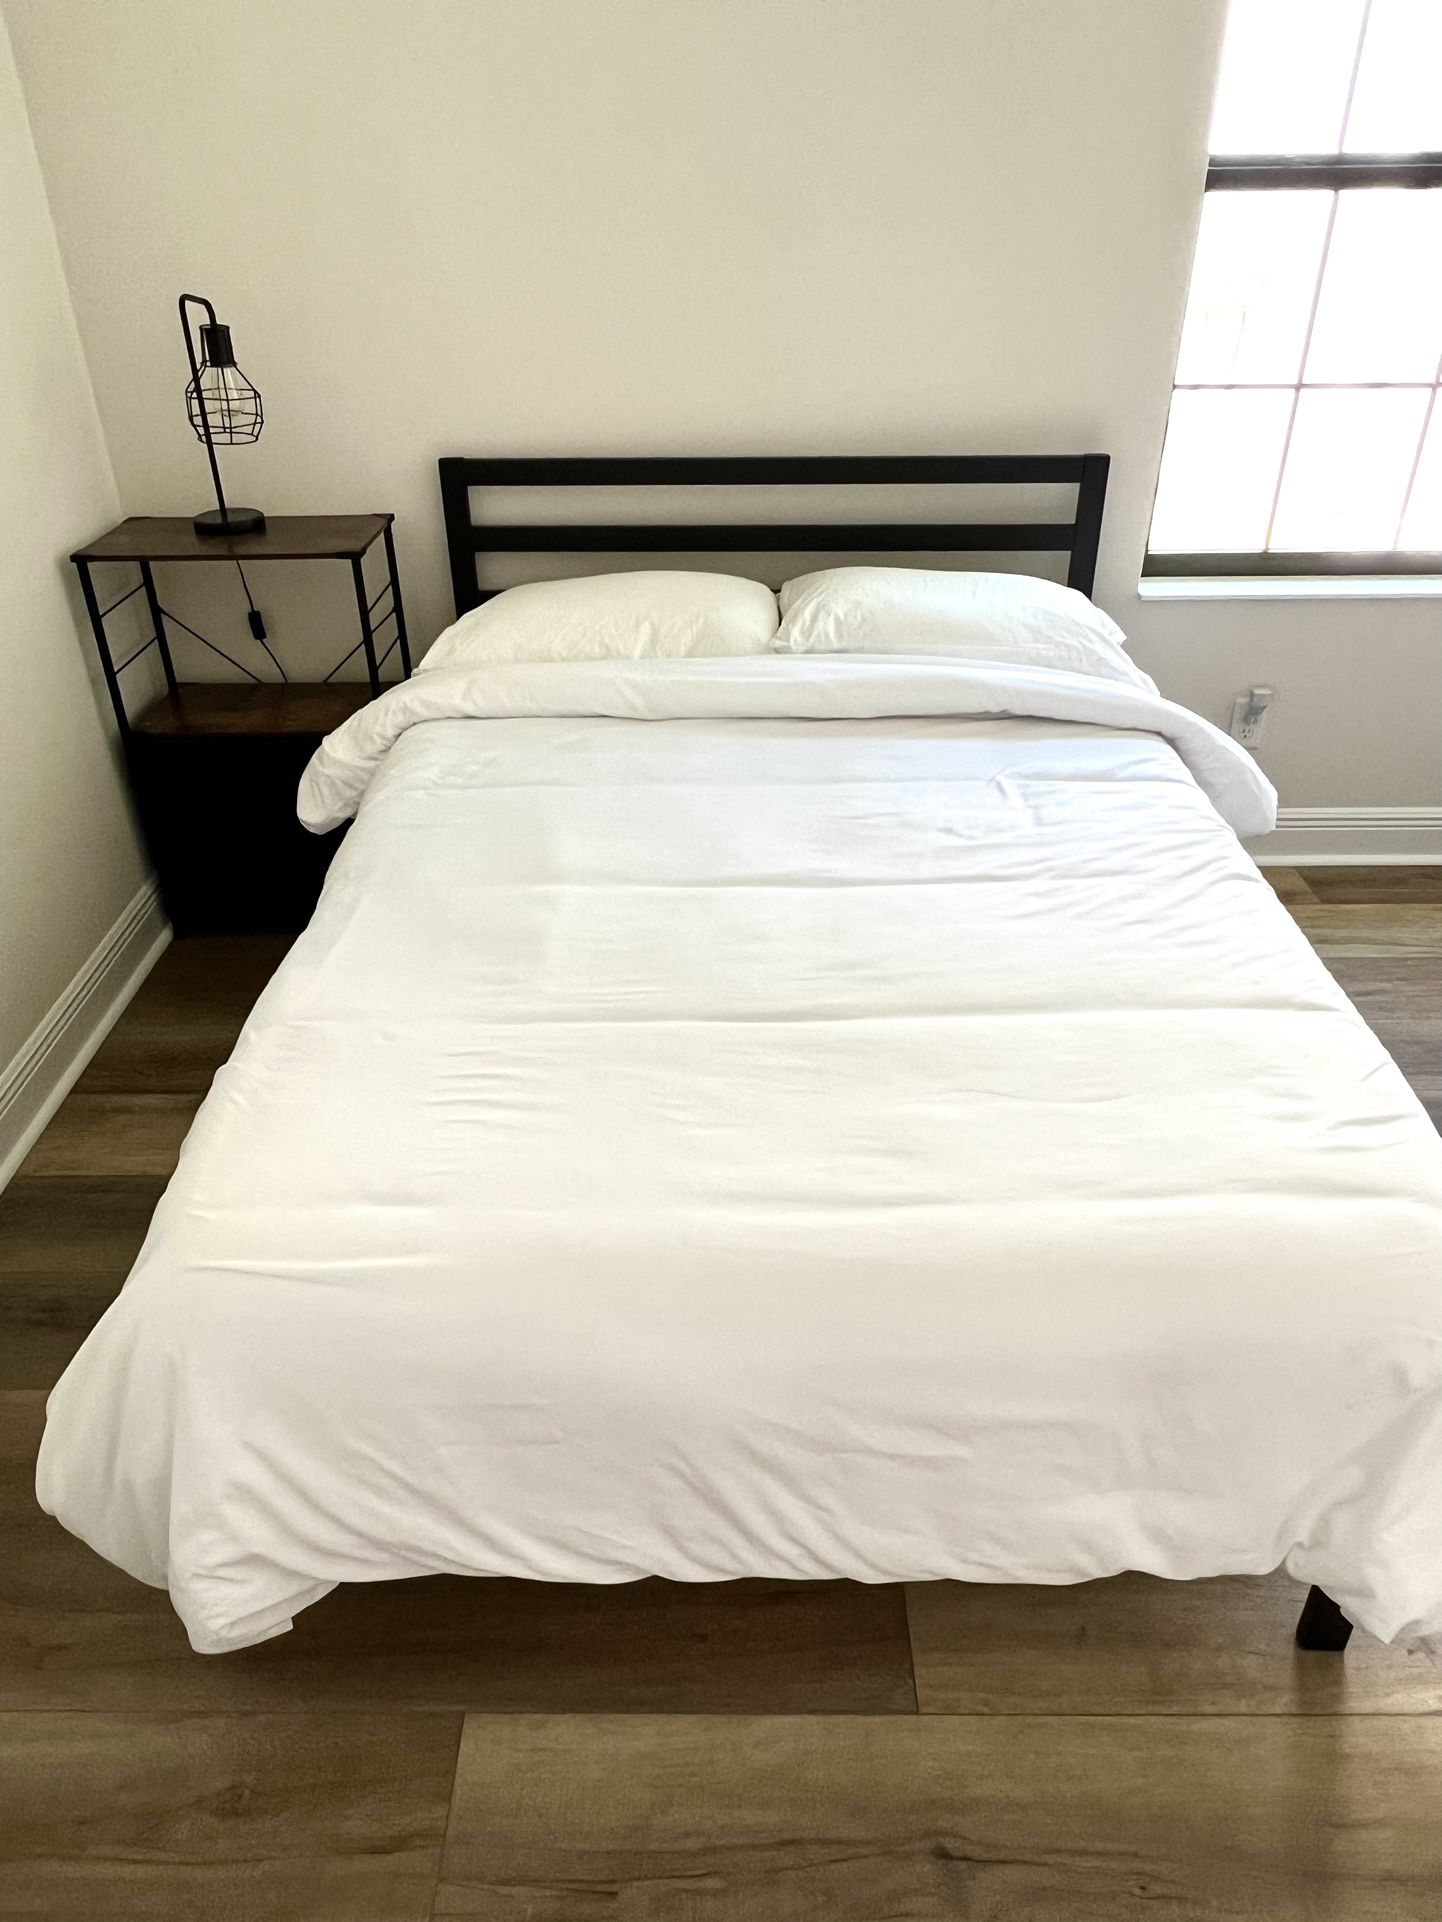 FULL SIZED BEDROOM SET WITH MATTRESS